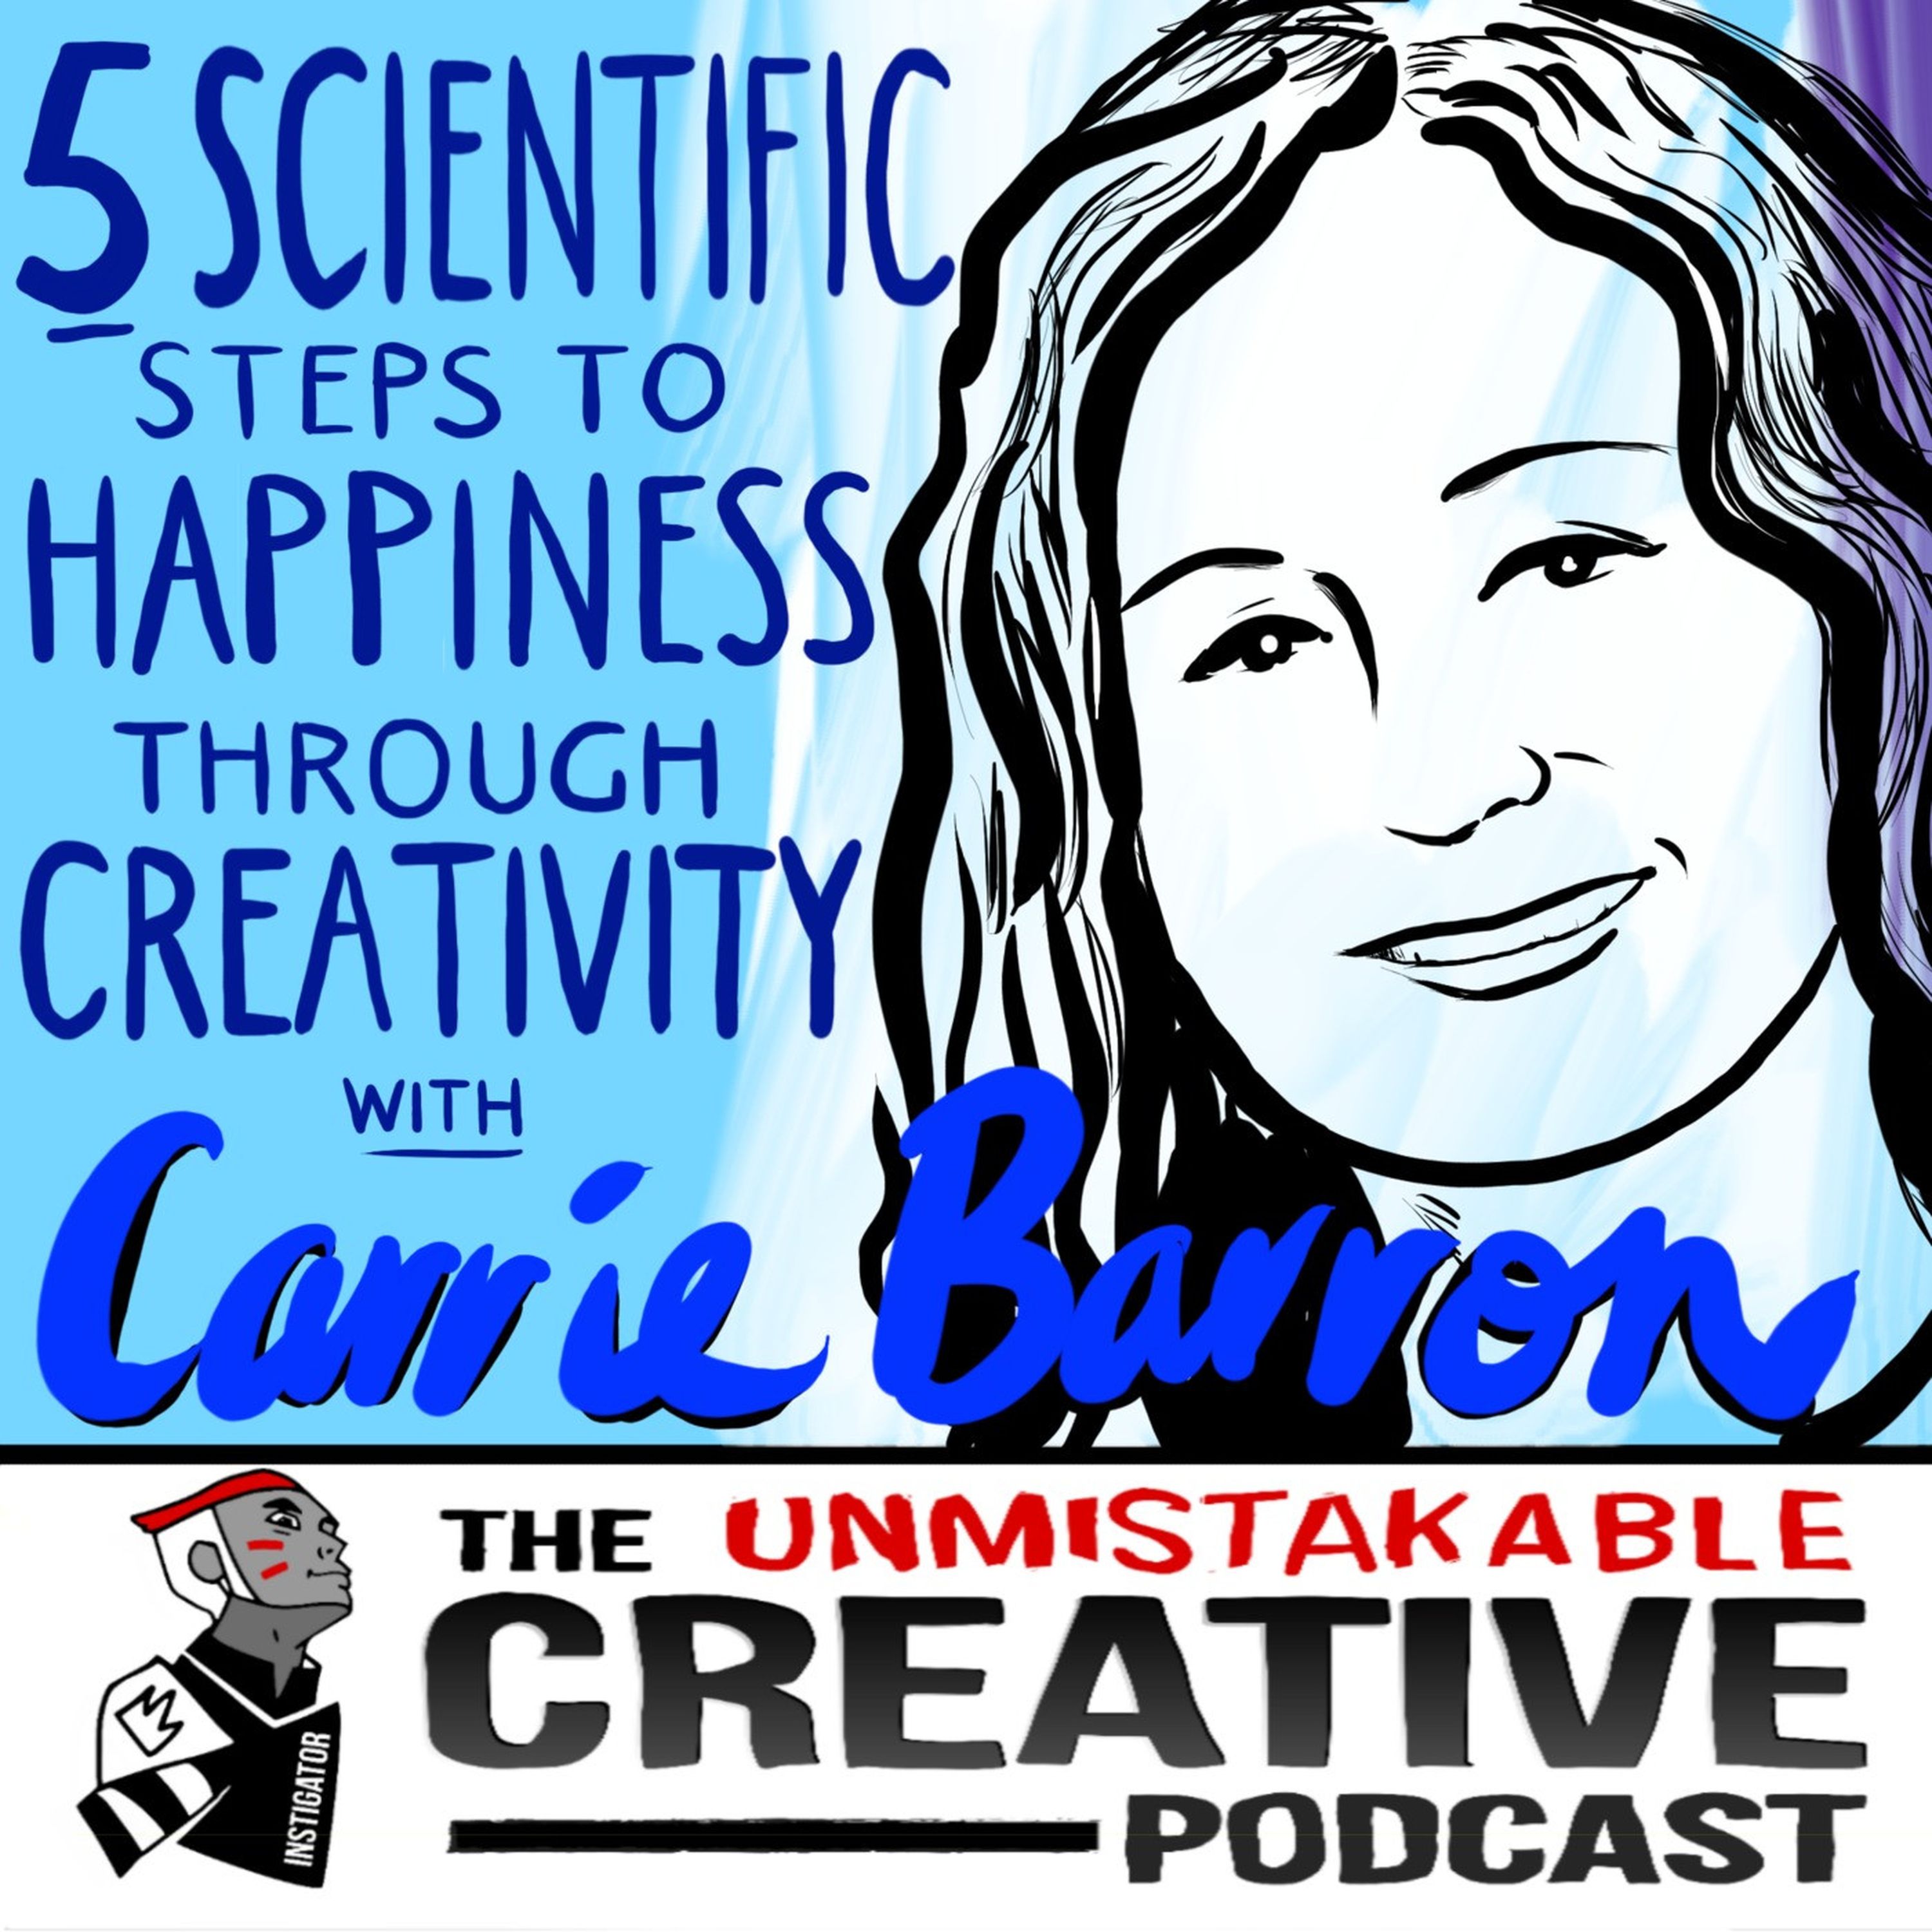 5 Scientific Steps To Happiness Through Creativity with Alton and Carrie Barron Image